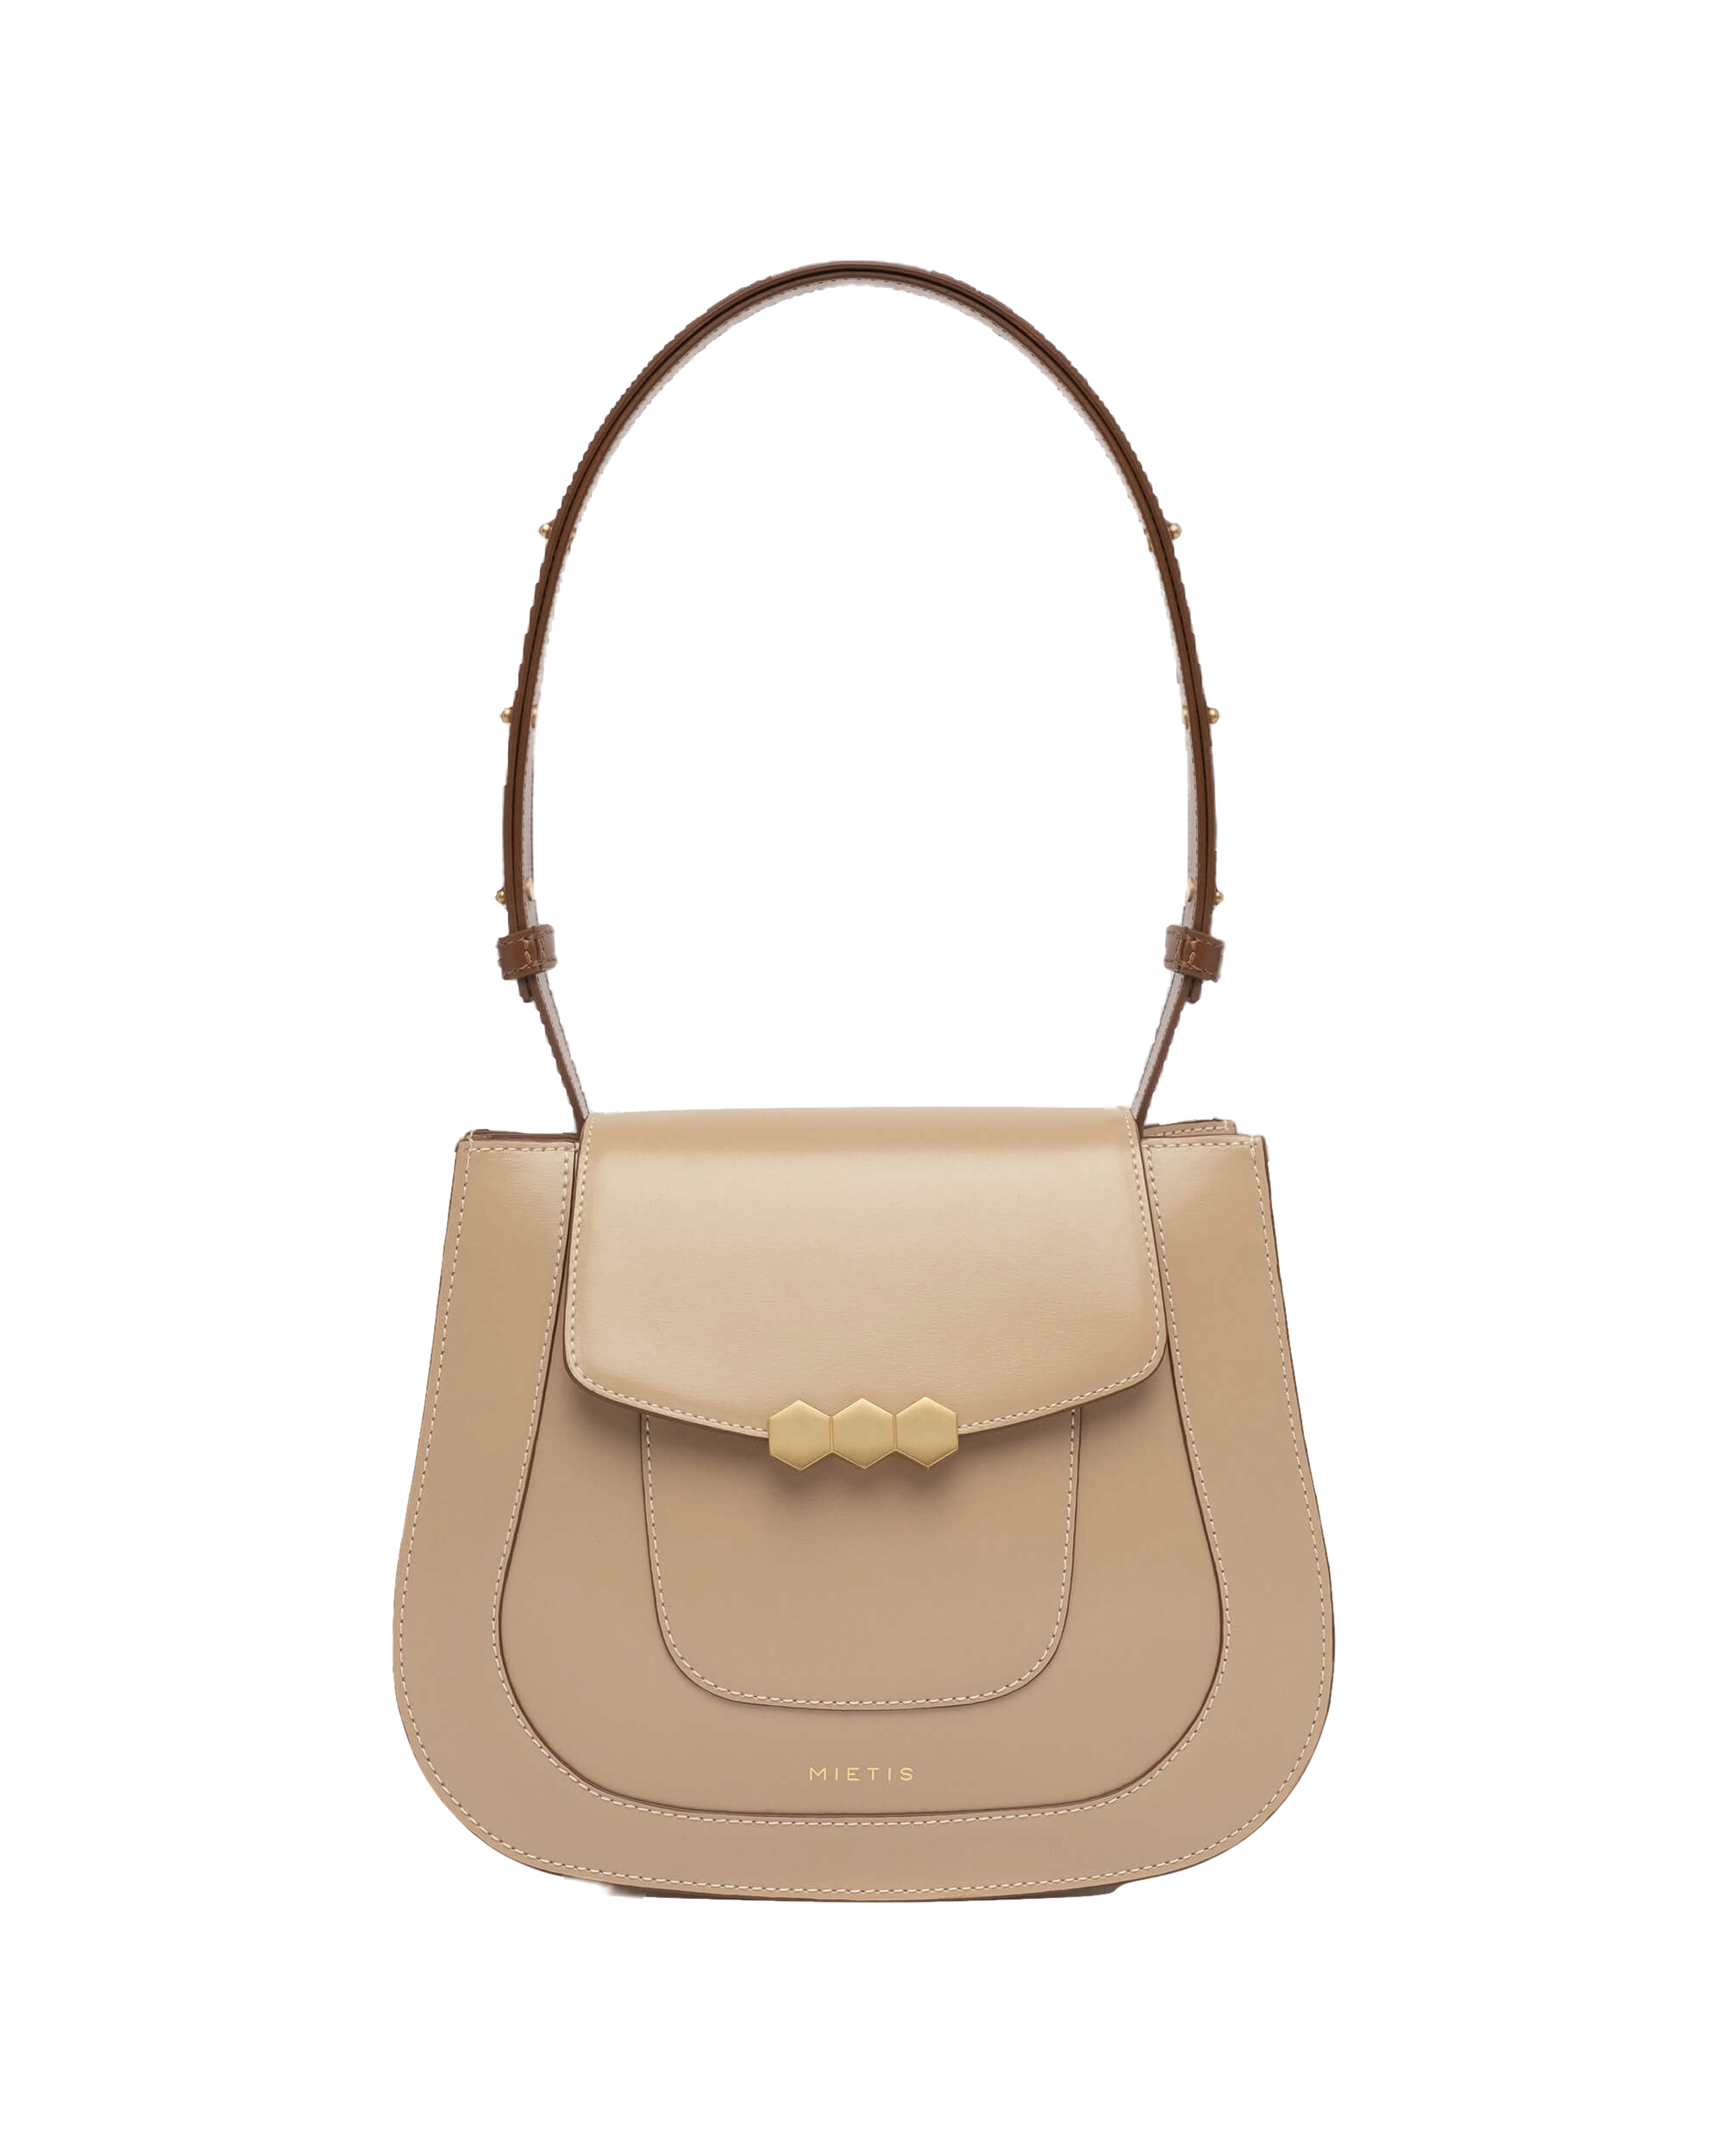 Mietis Jill Arena In Beige